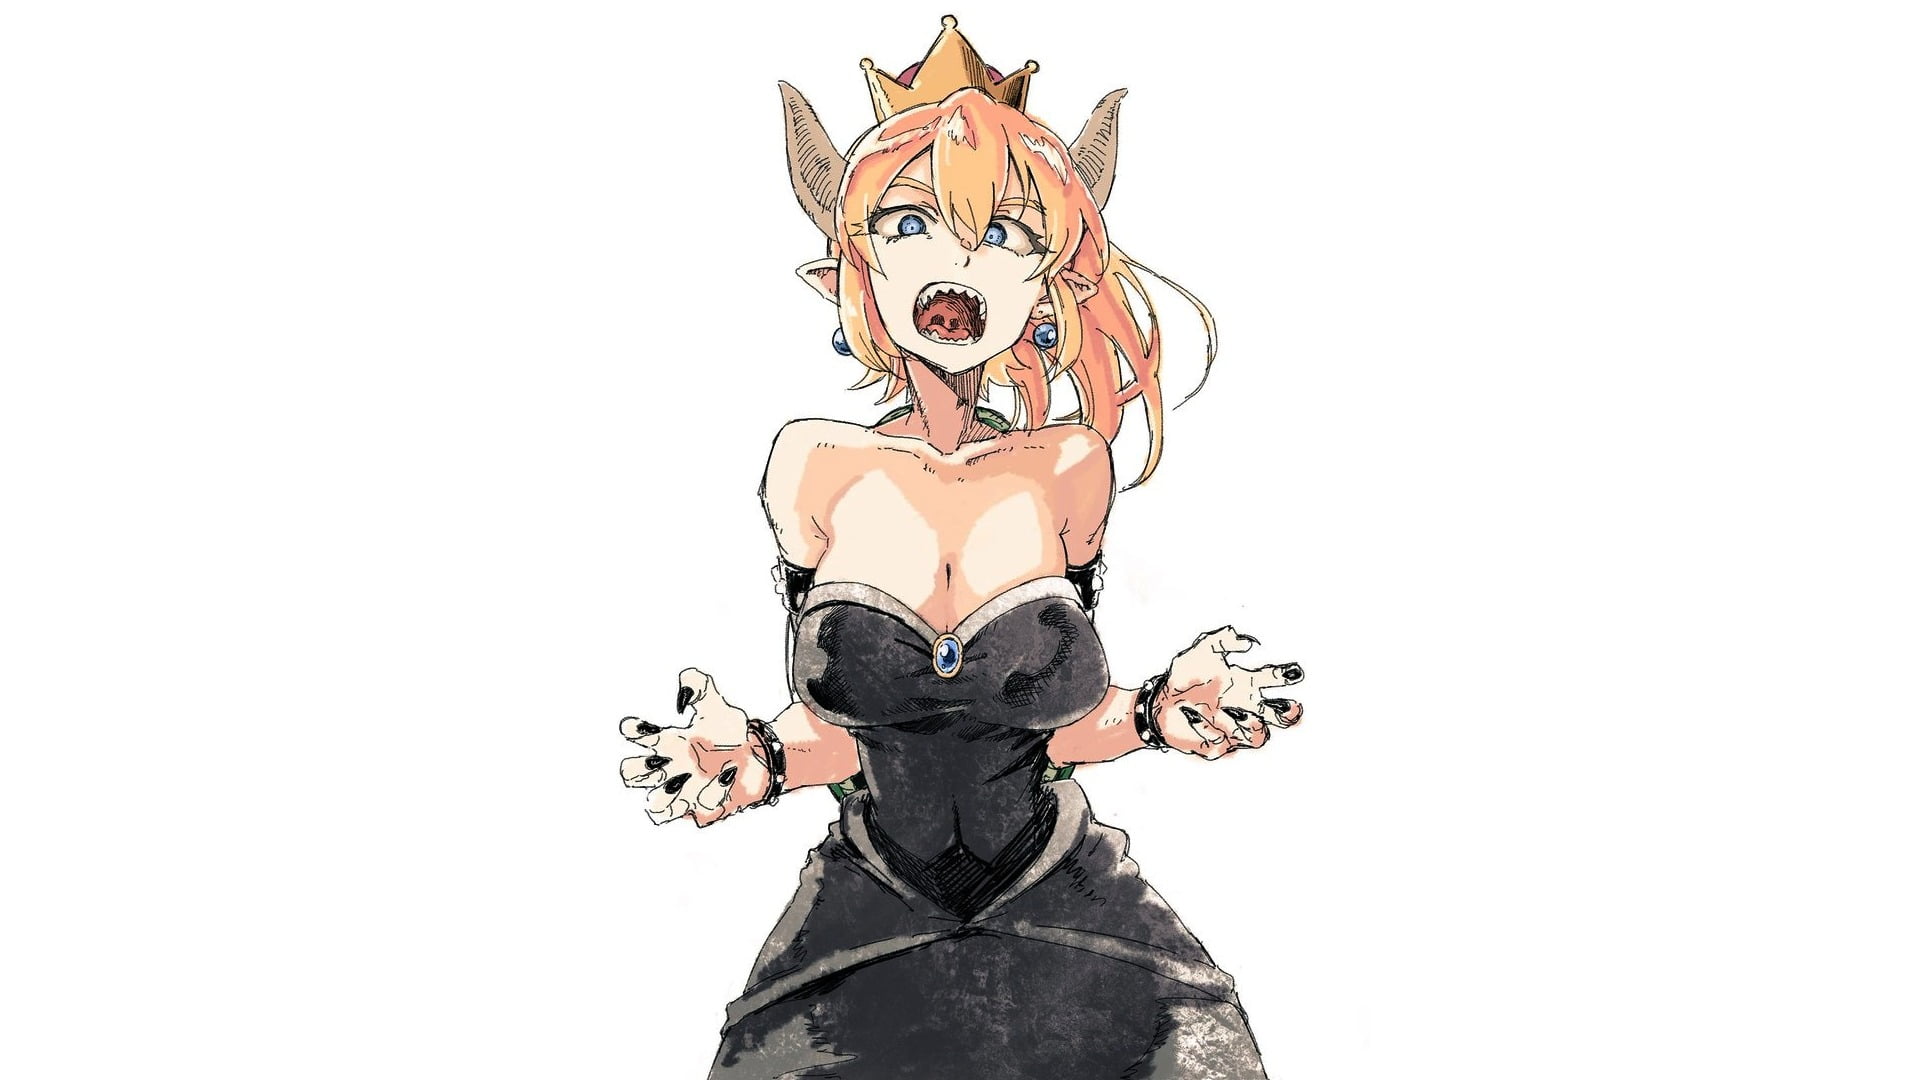 yellow-haired girl in black dress with crown character illustration